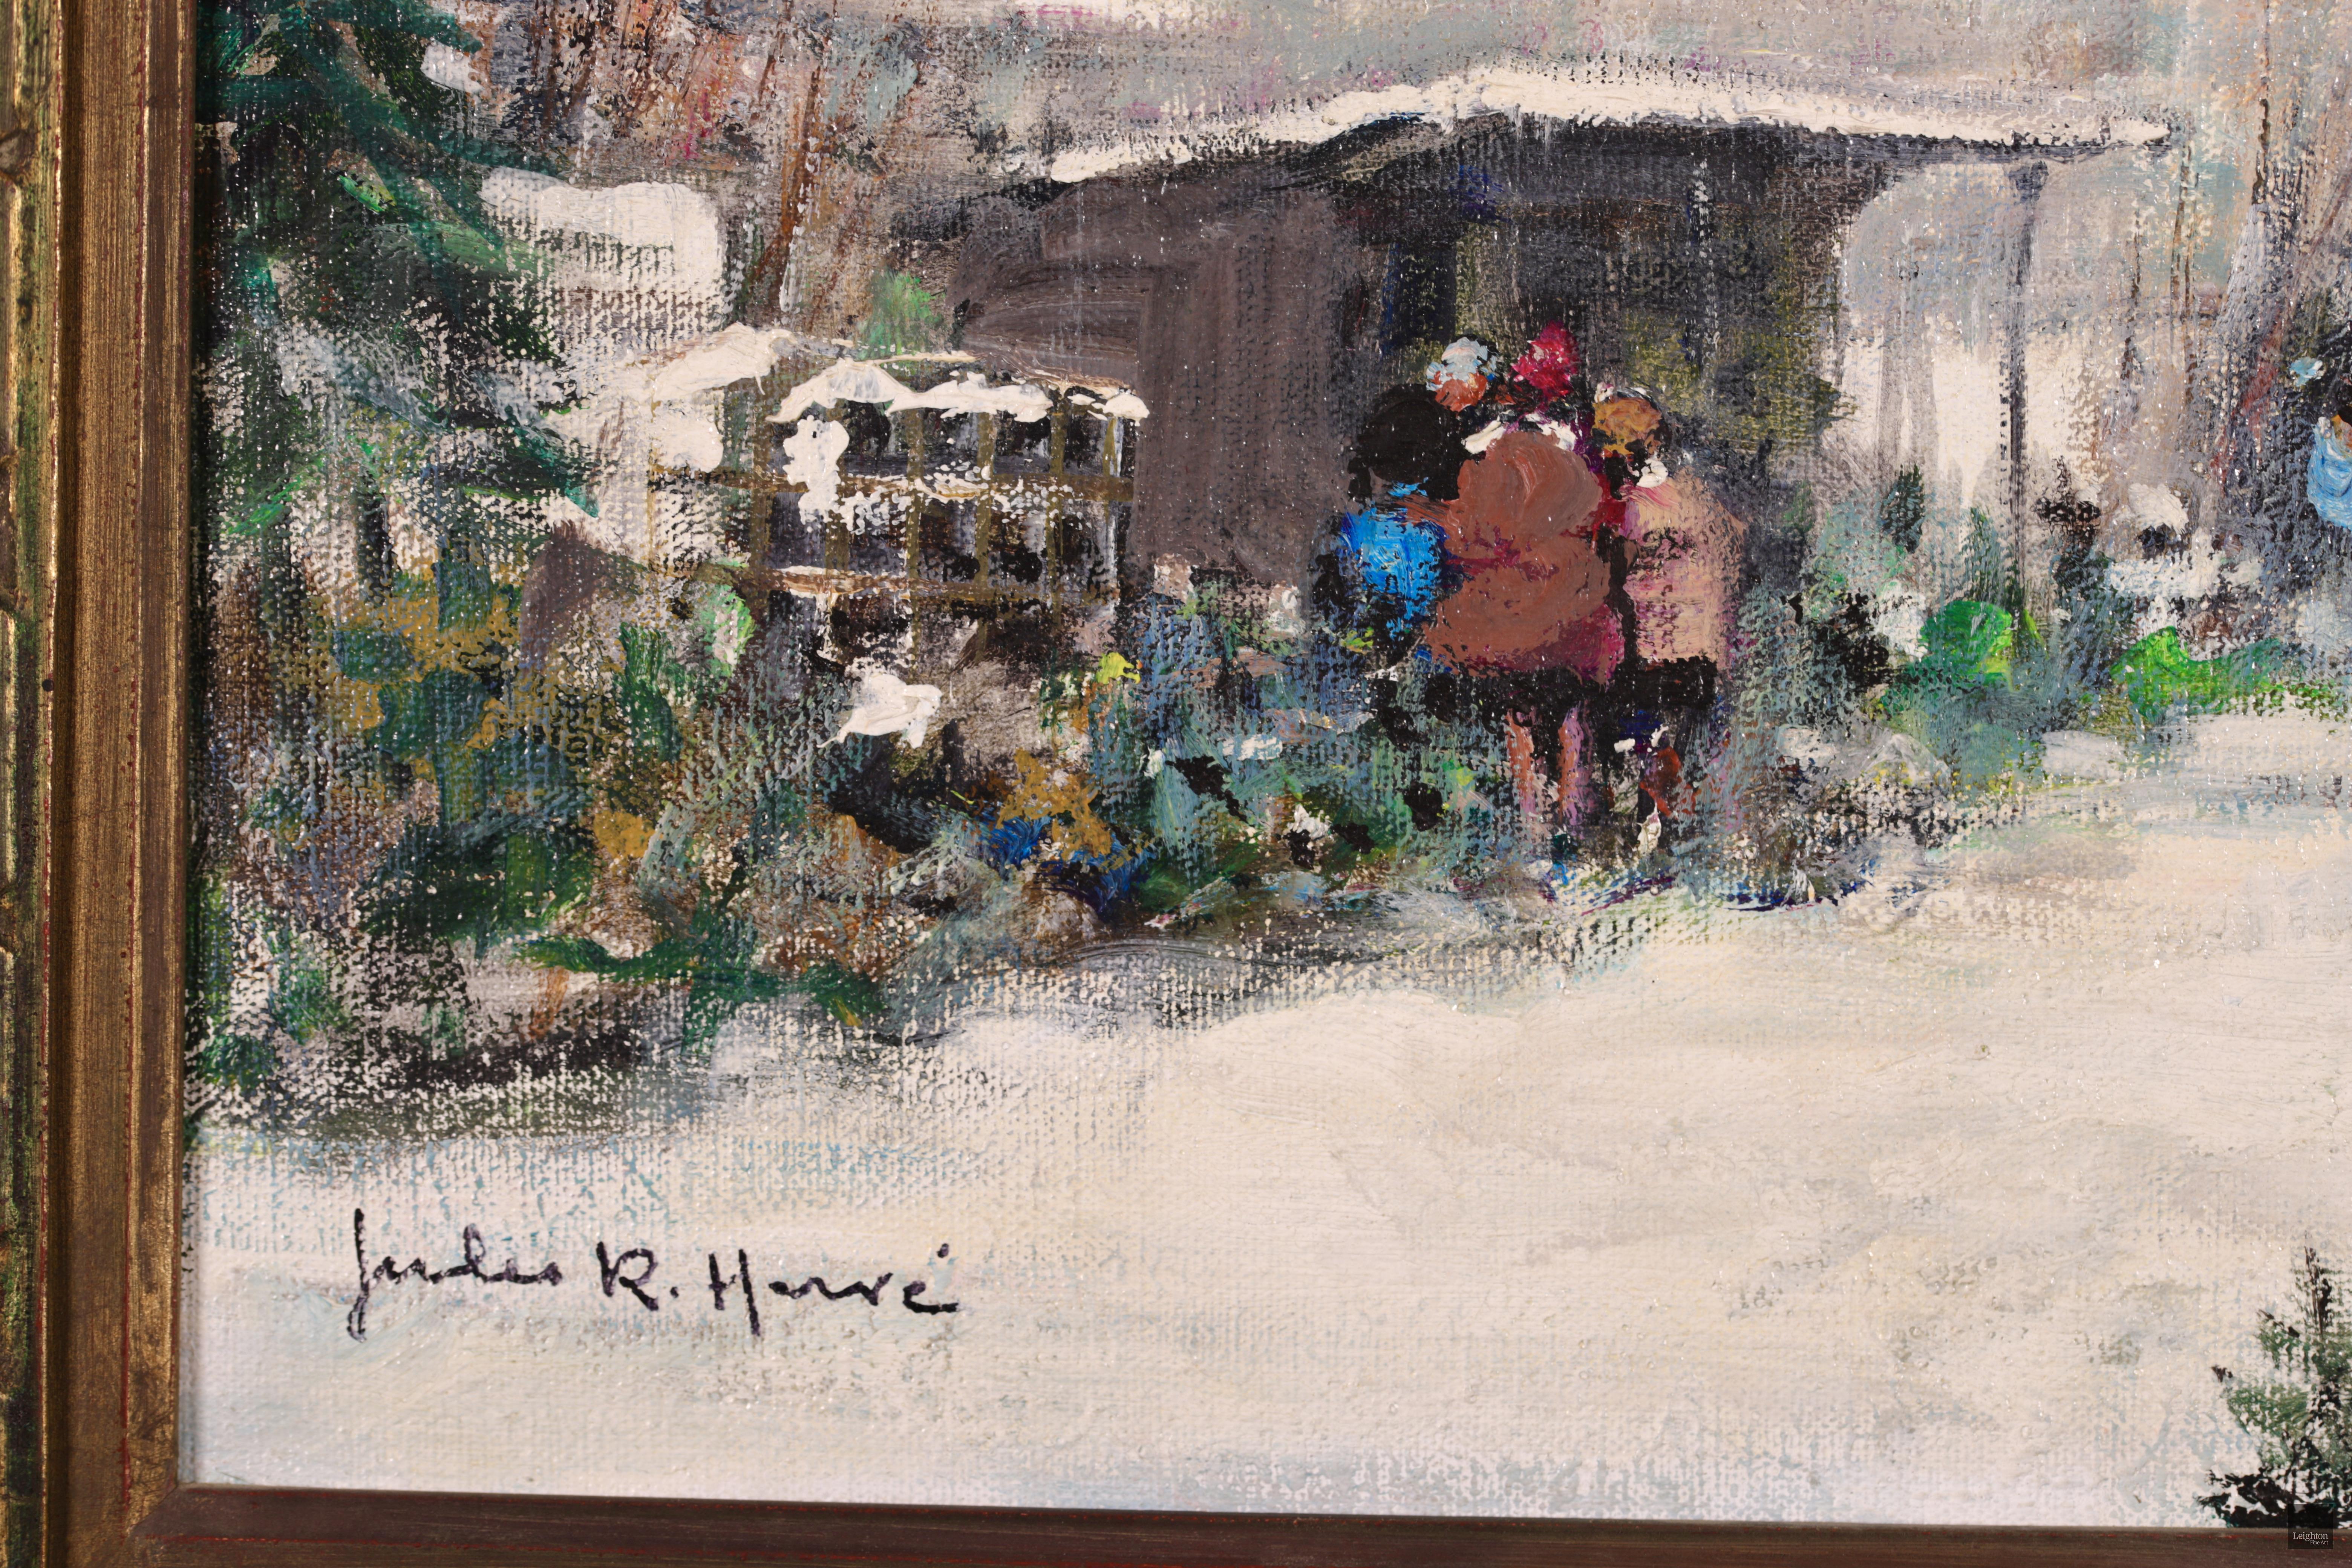 Signed impressionist figurative landscape oil on canvas circa 1950 by French painter Jules Rene Herve. The winter landscape shows a Christmas tree market with customers and stallholders gathered around their wooden huts. The bright green of the